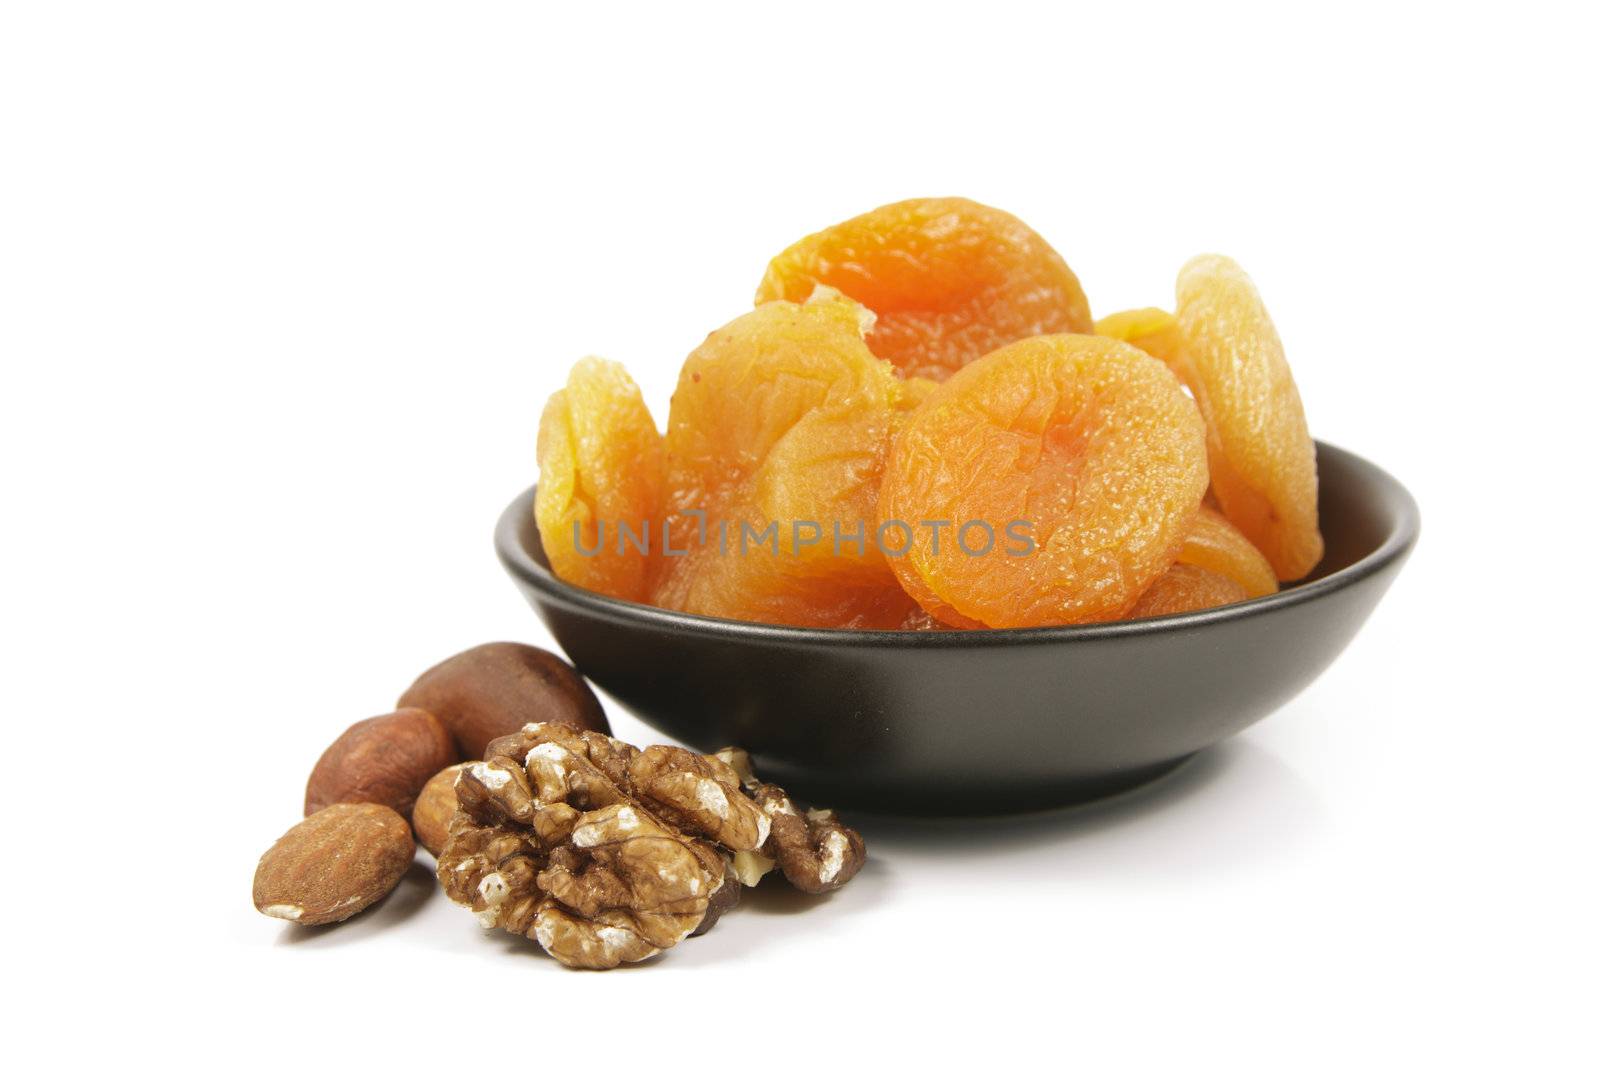 Dried juicy orange apricots with mixed nuts in a small black bowl on a reflective white background